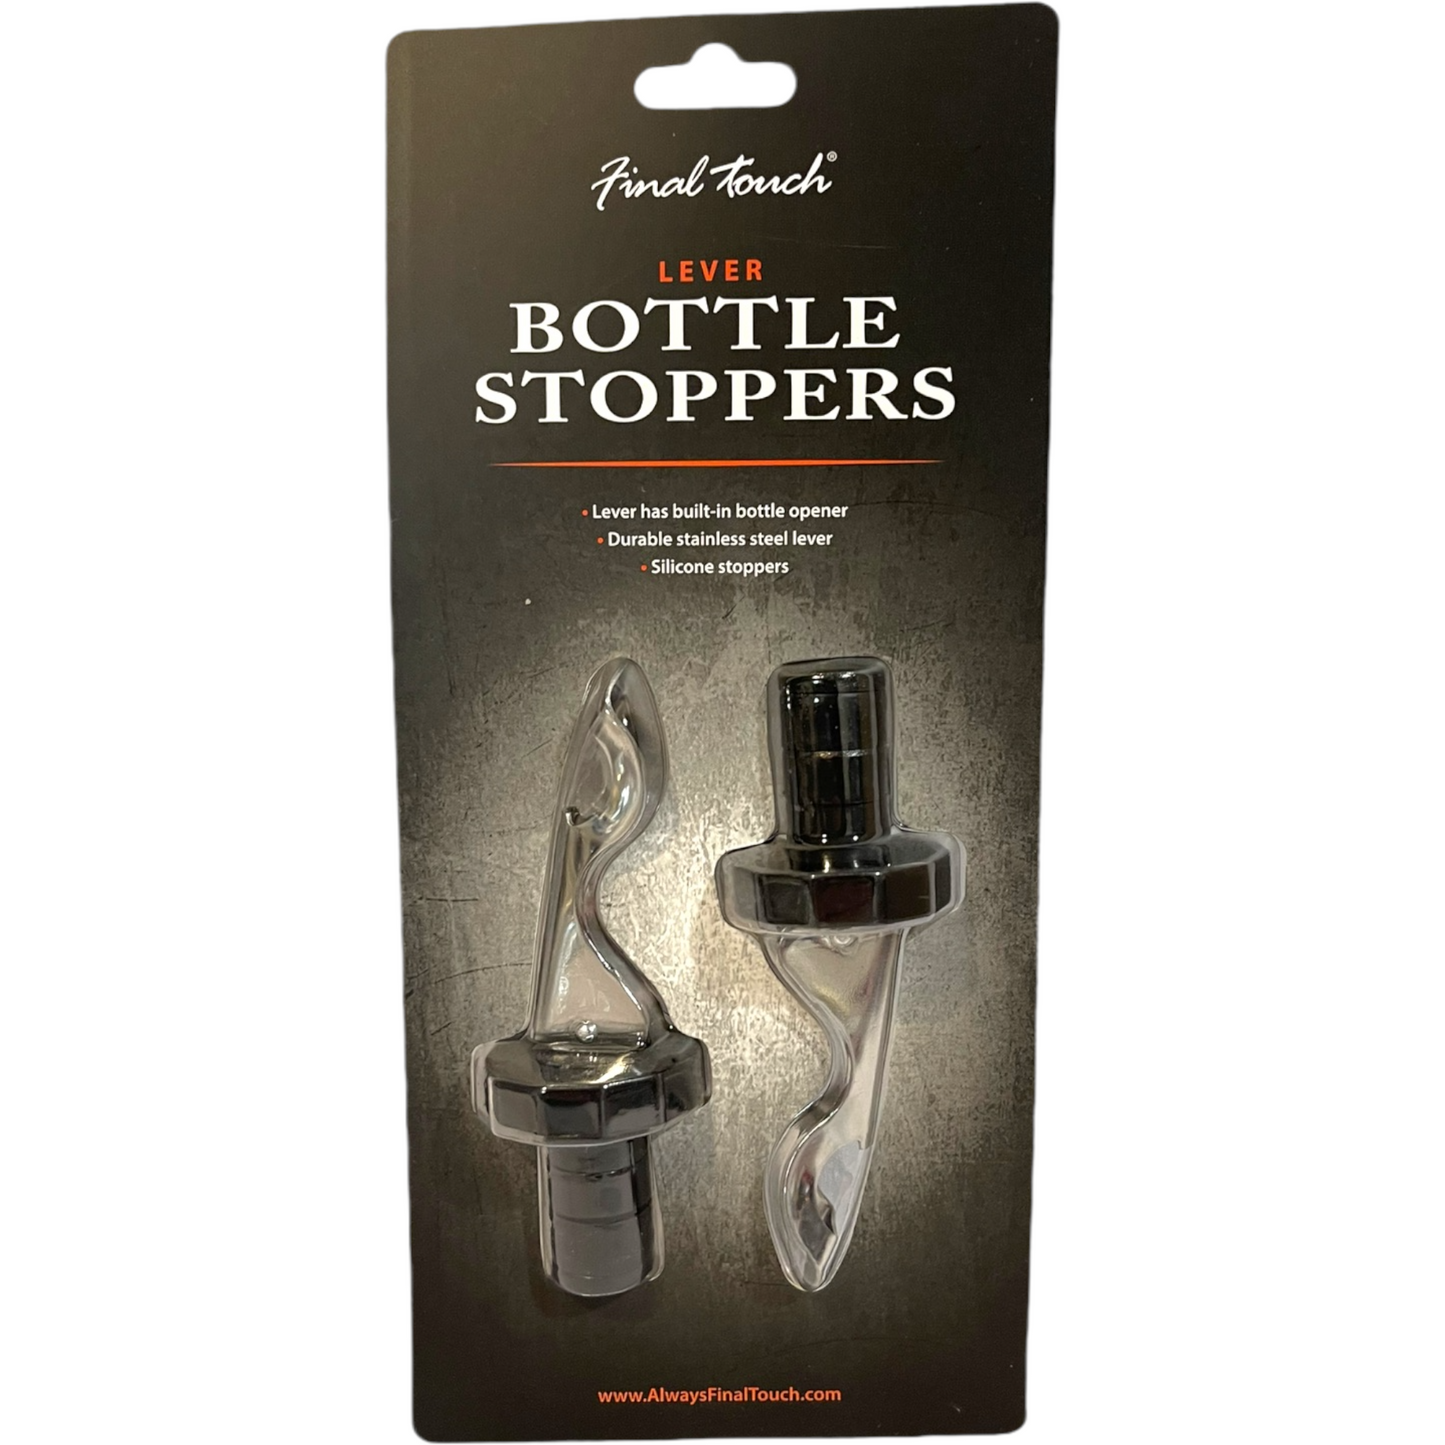 FINAL TOUCH LEVER BOTTLE STOPPERS